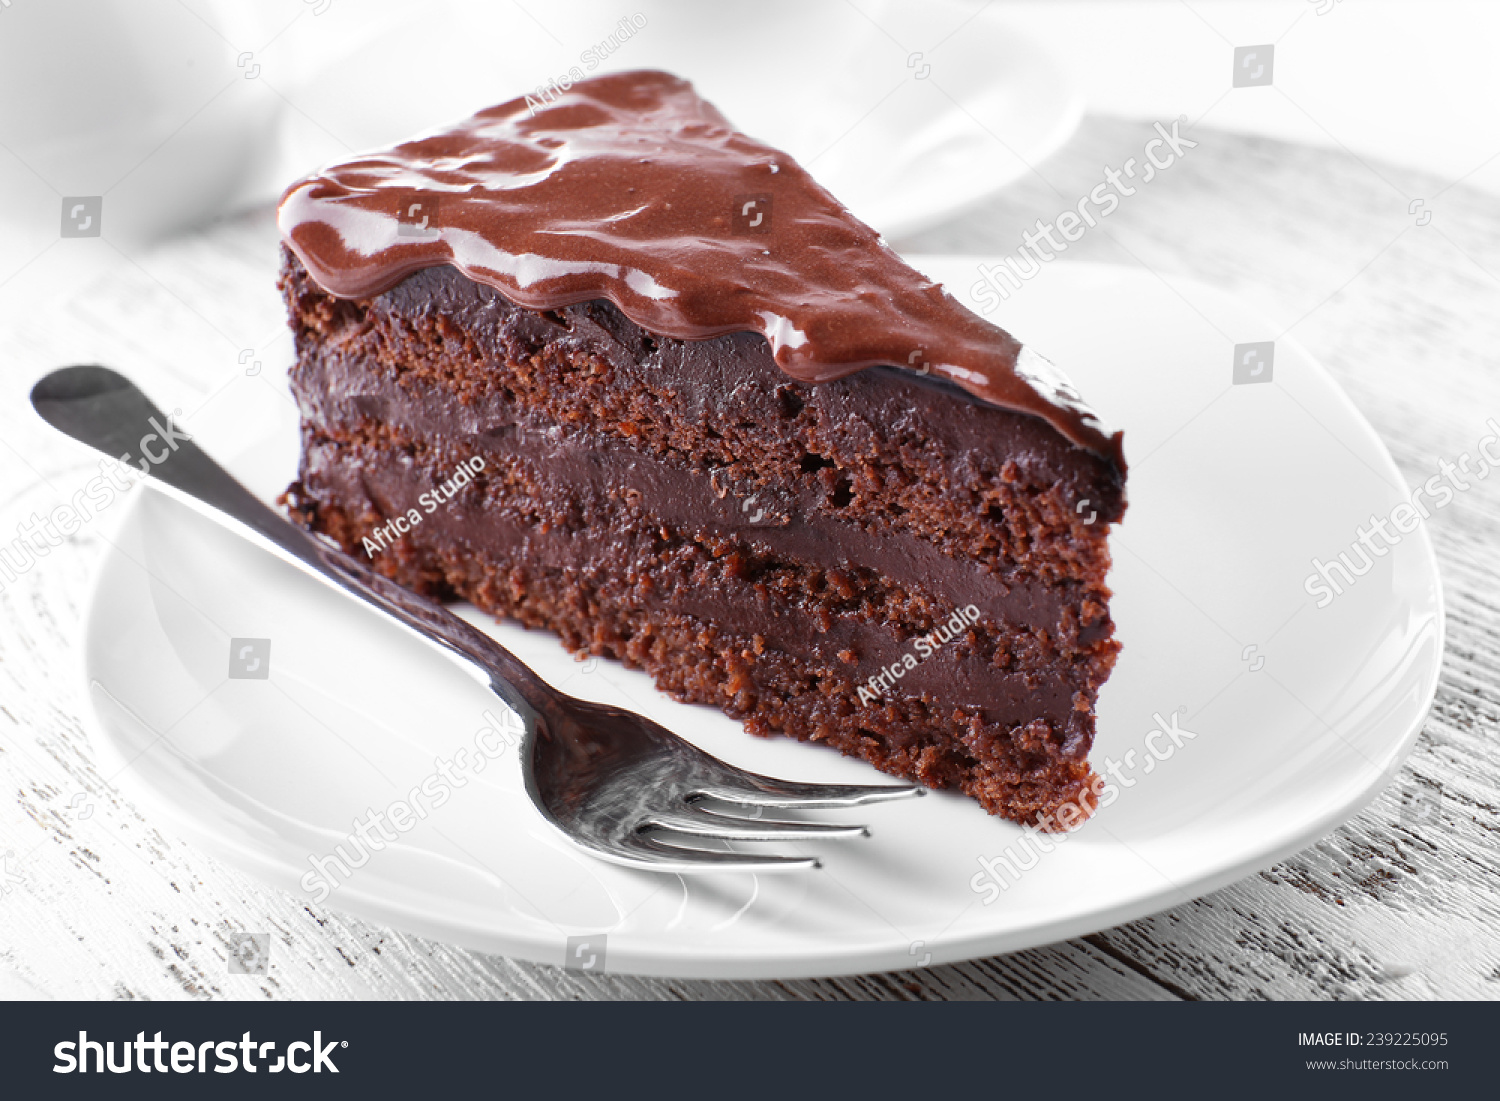 Delicious chocolate cake on plate on table on light background #239225095